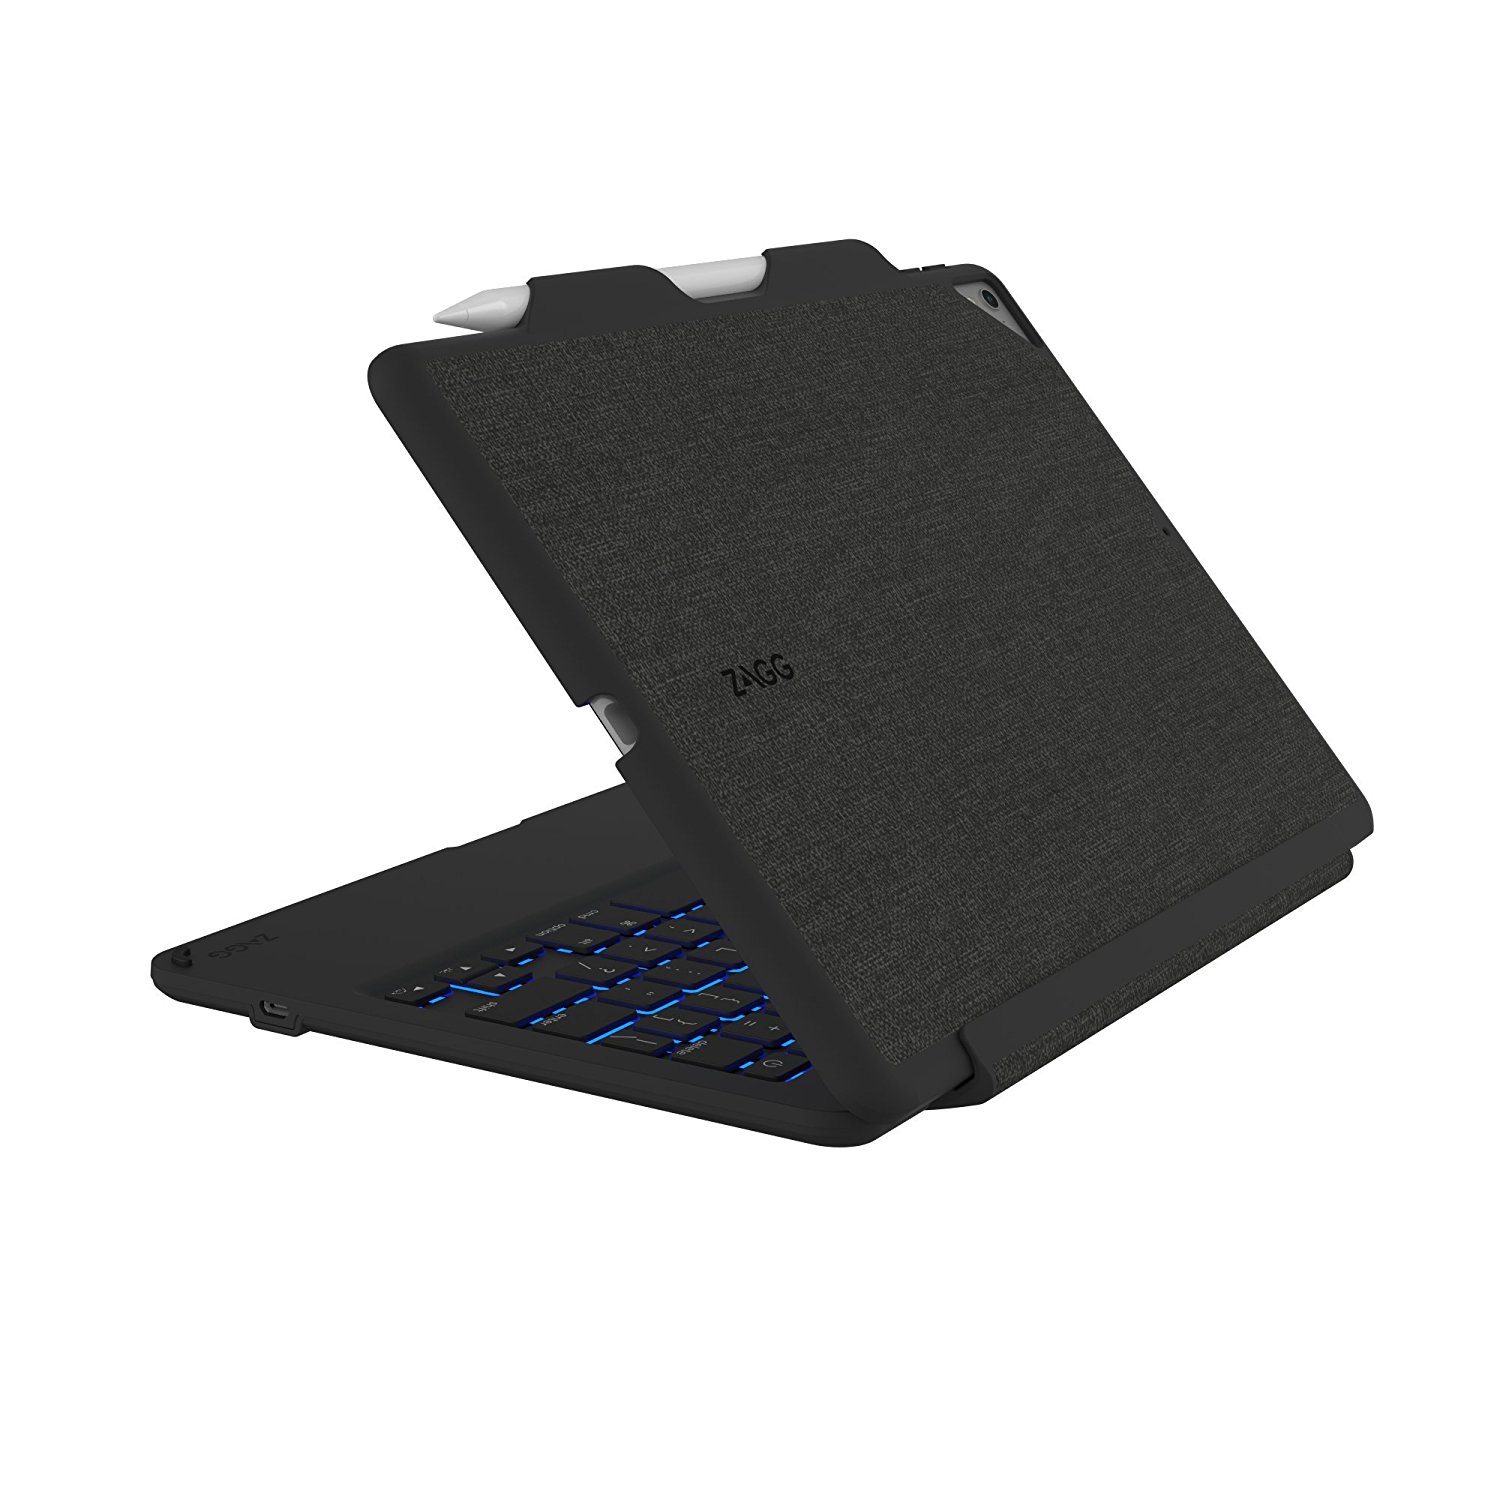 Review: ZAGG Slim Book Keyboard Case for 10.5-inch iPad Pro